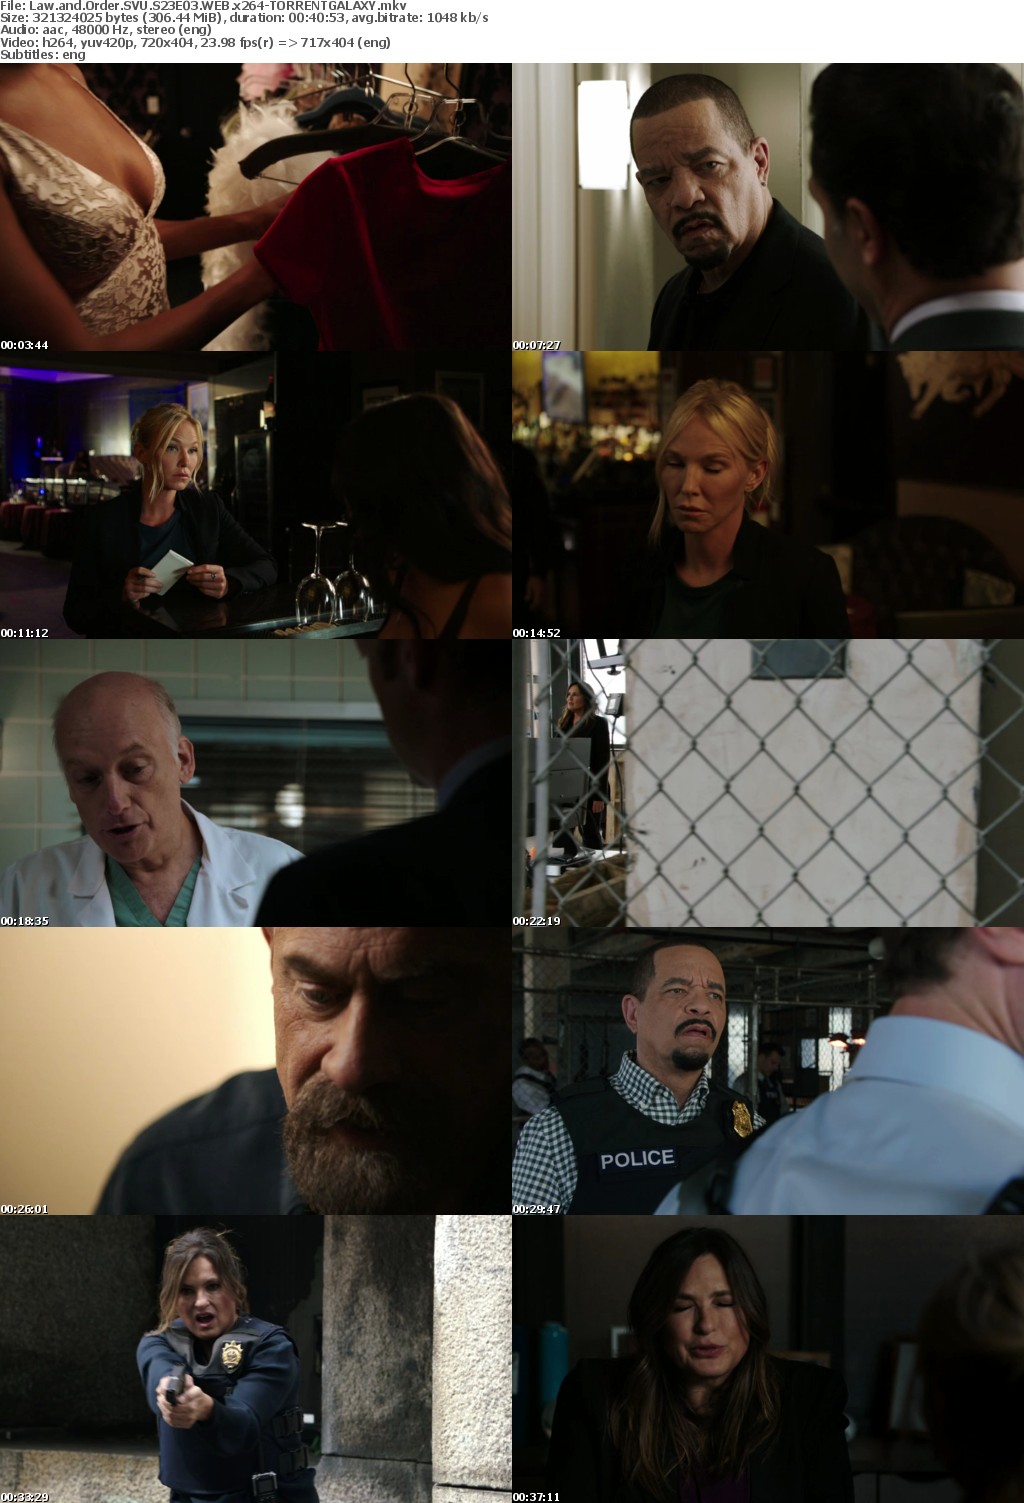 Law and Order SVU S23E03 WEB x264-GALAXY